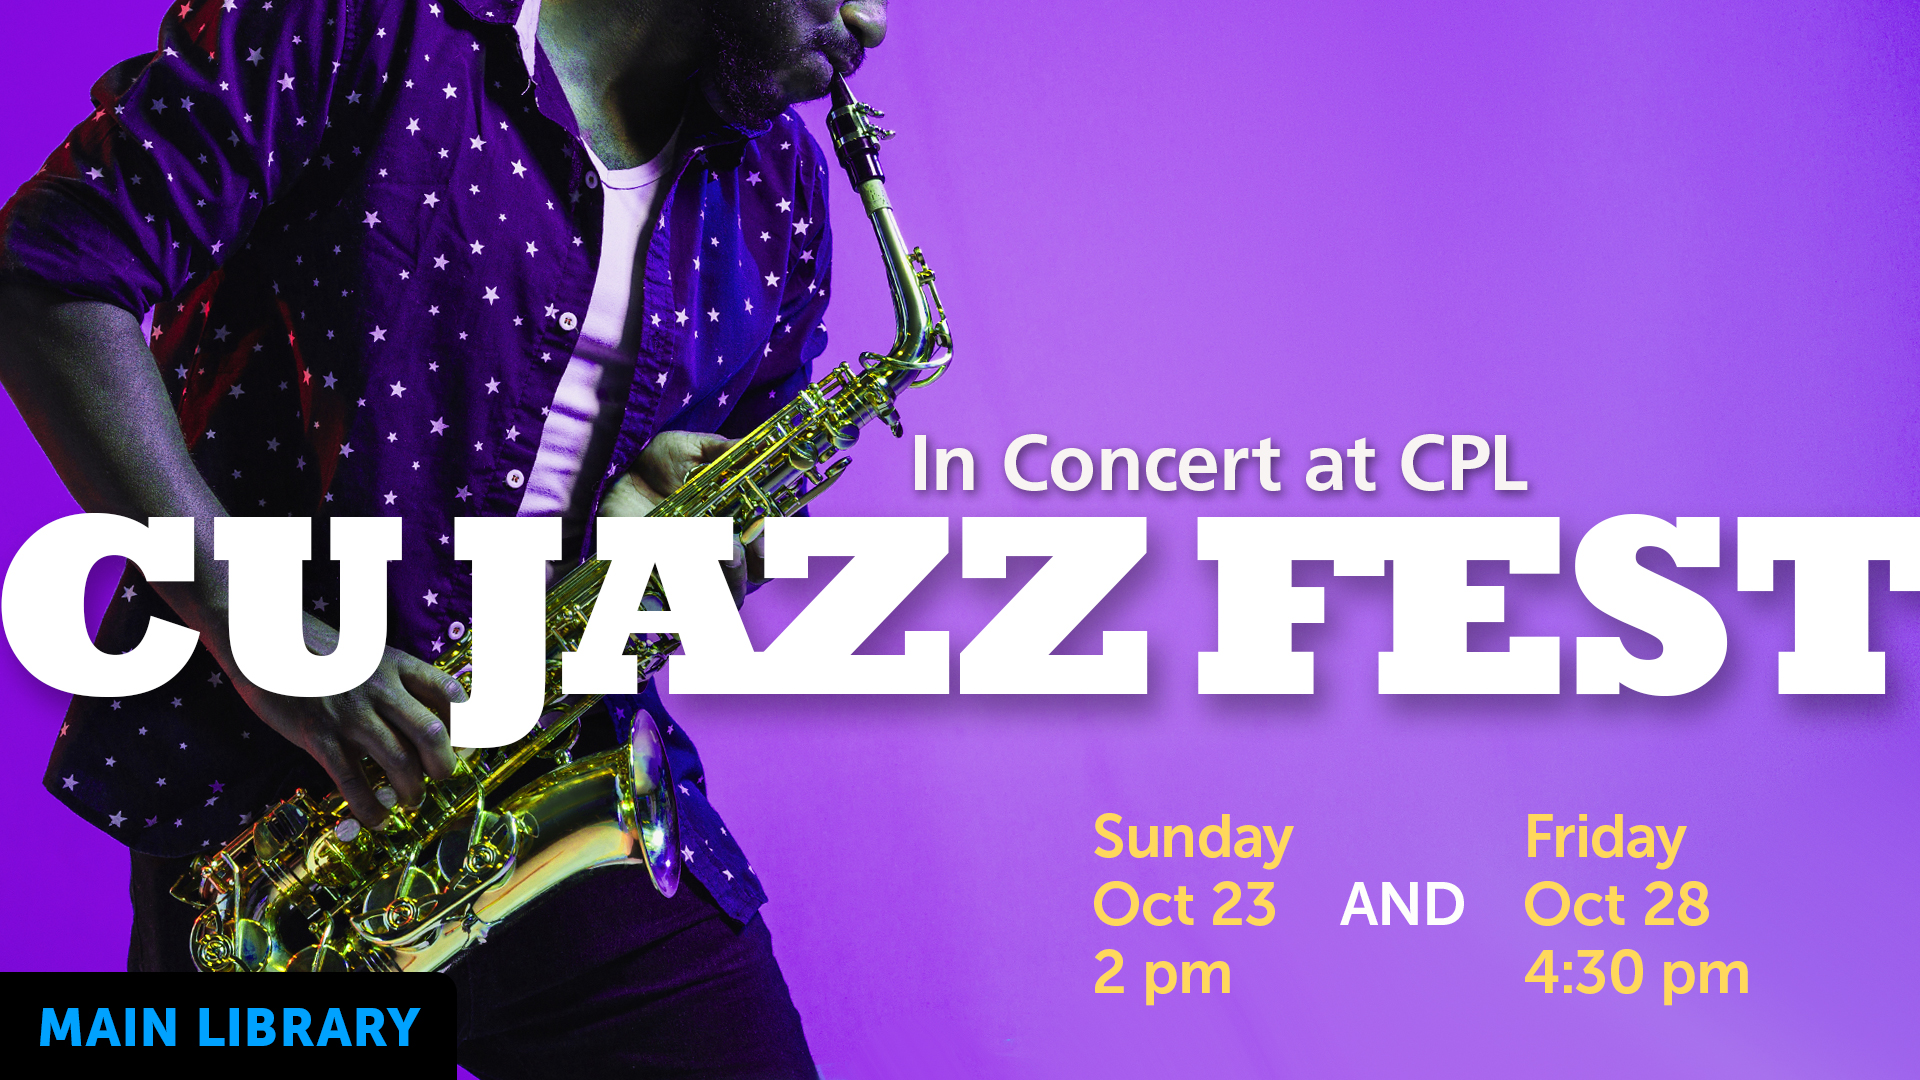 CU Jazz Fest at the Library